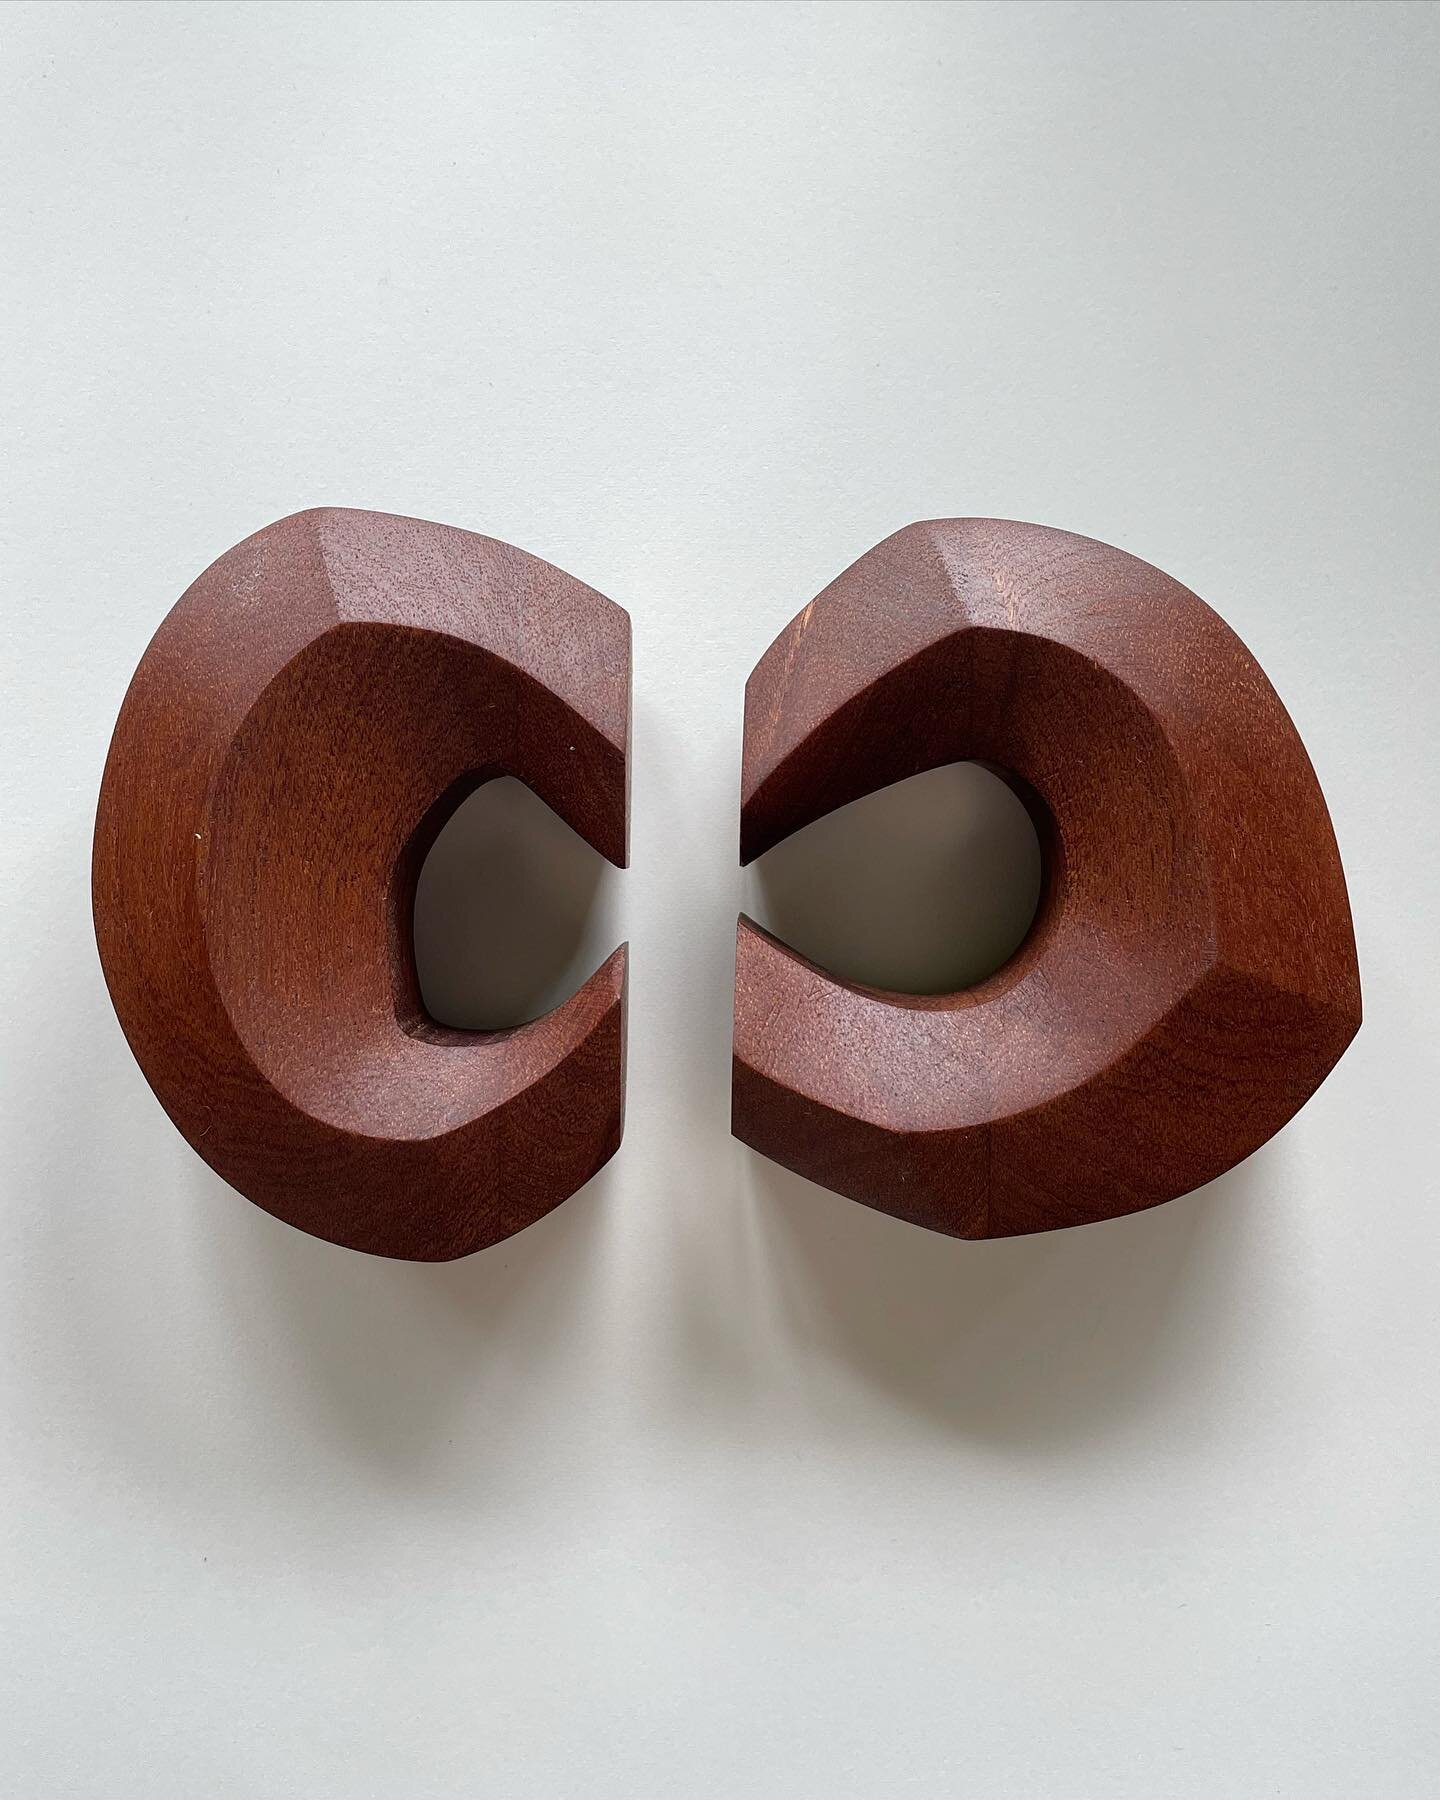 &ldquo;Arch/Cove&rdquo; - pair of carved mahogany handles. Holders of space and potential, curves imply limitless even in their structure. Found in sanctuaries spanning culture and time&hellip; lightness, inhales, otherworlds.

Made specially for @go